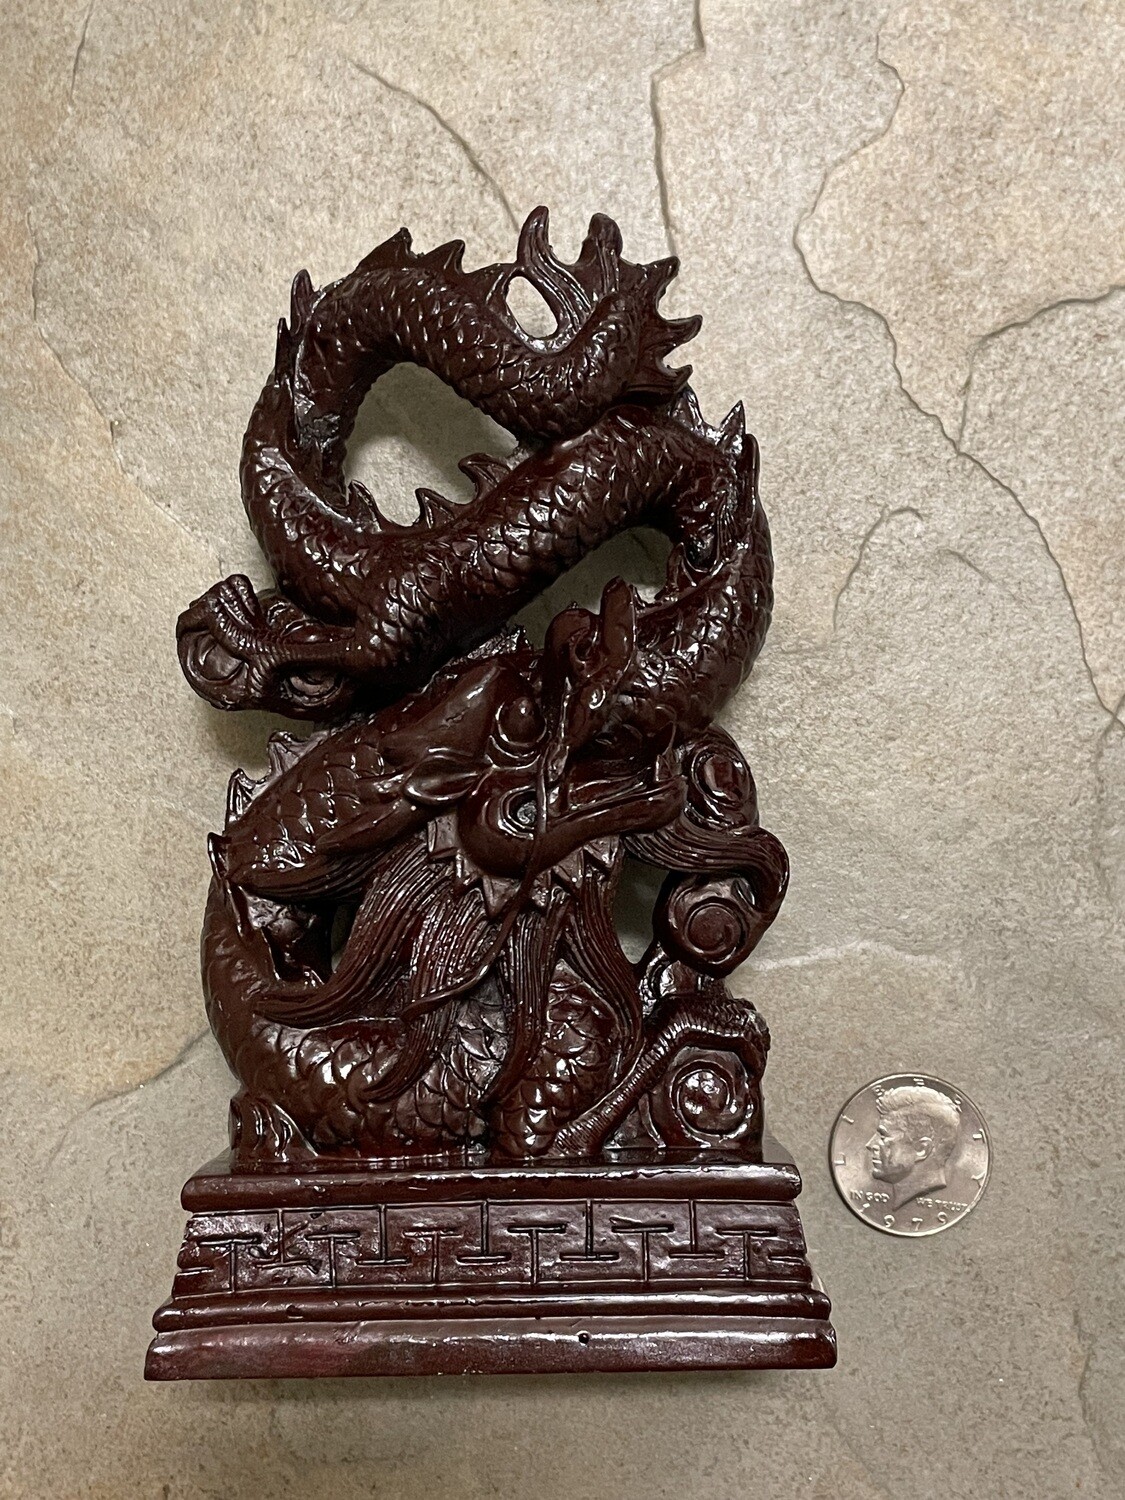 Lucky Dragon Statue FREE PRIORITY SHIPPING and FREE Nephrite Jade Bracelet!